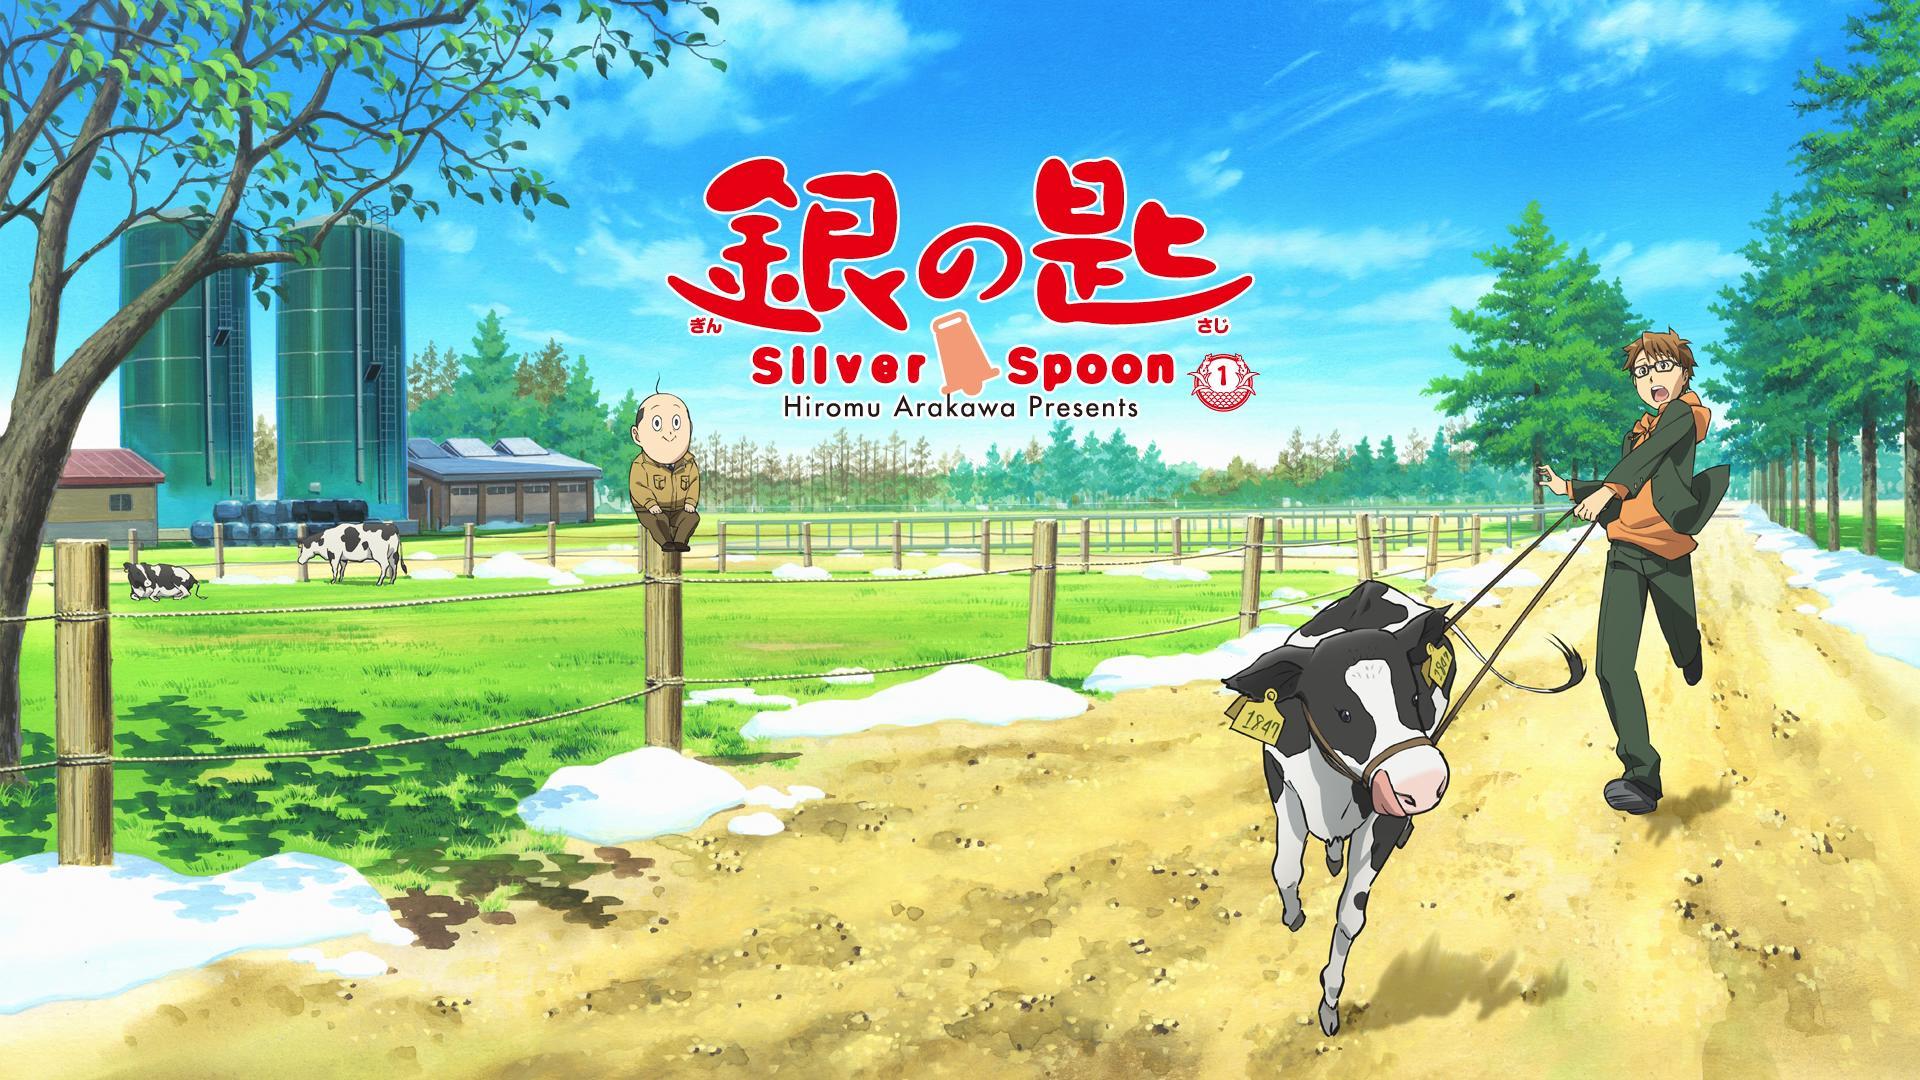 Silver Spoon Manga Will Resume on August 31  News  Anime News Network